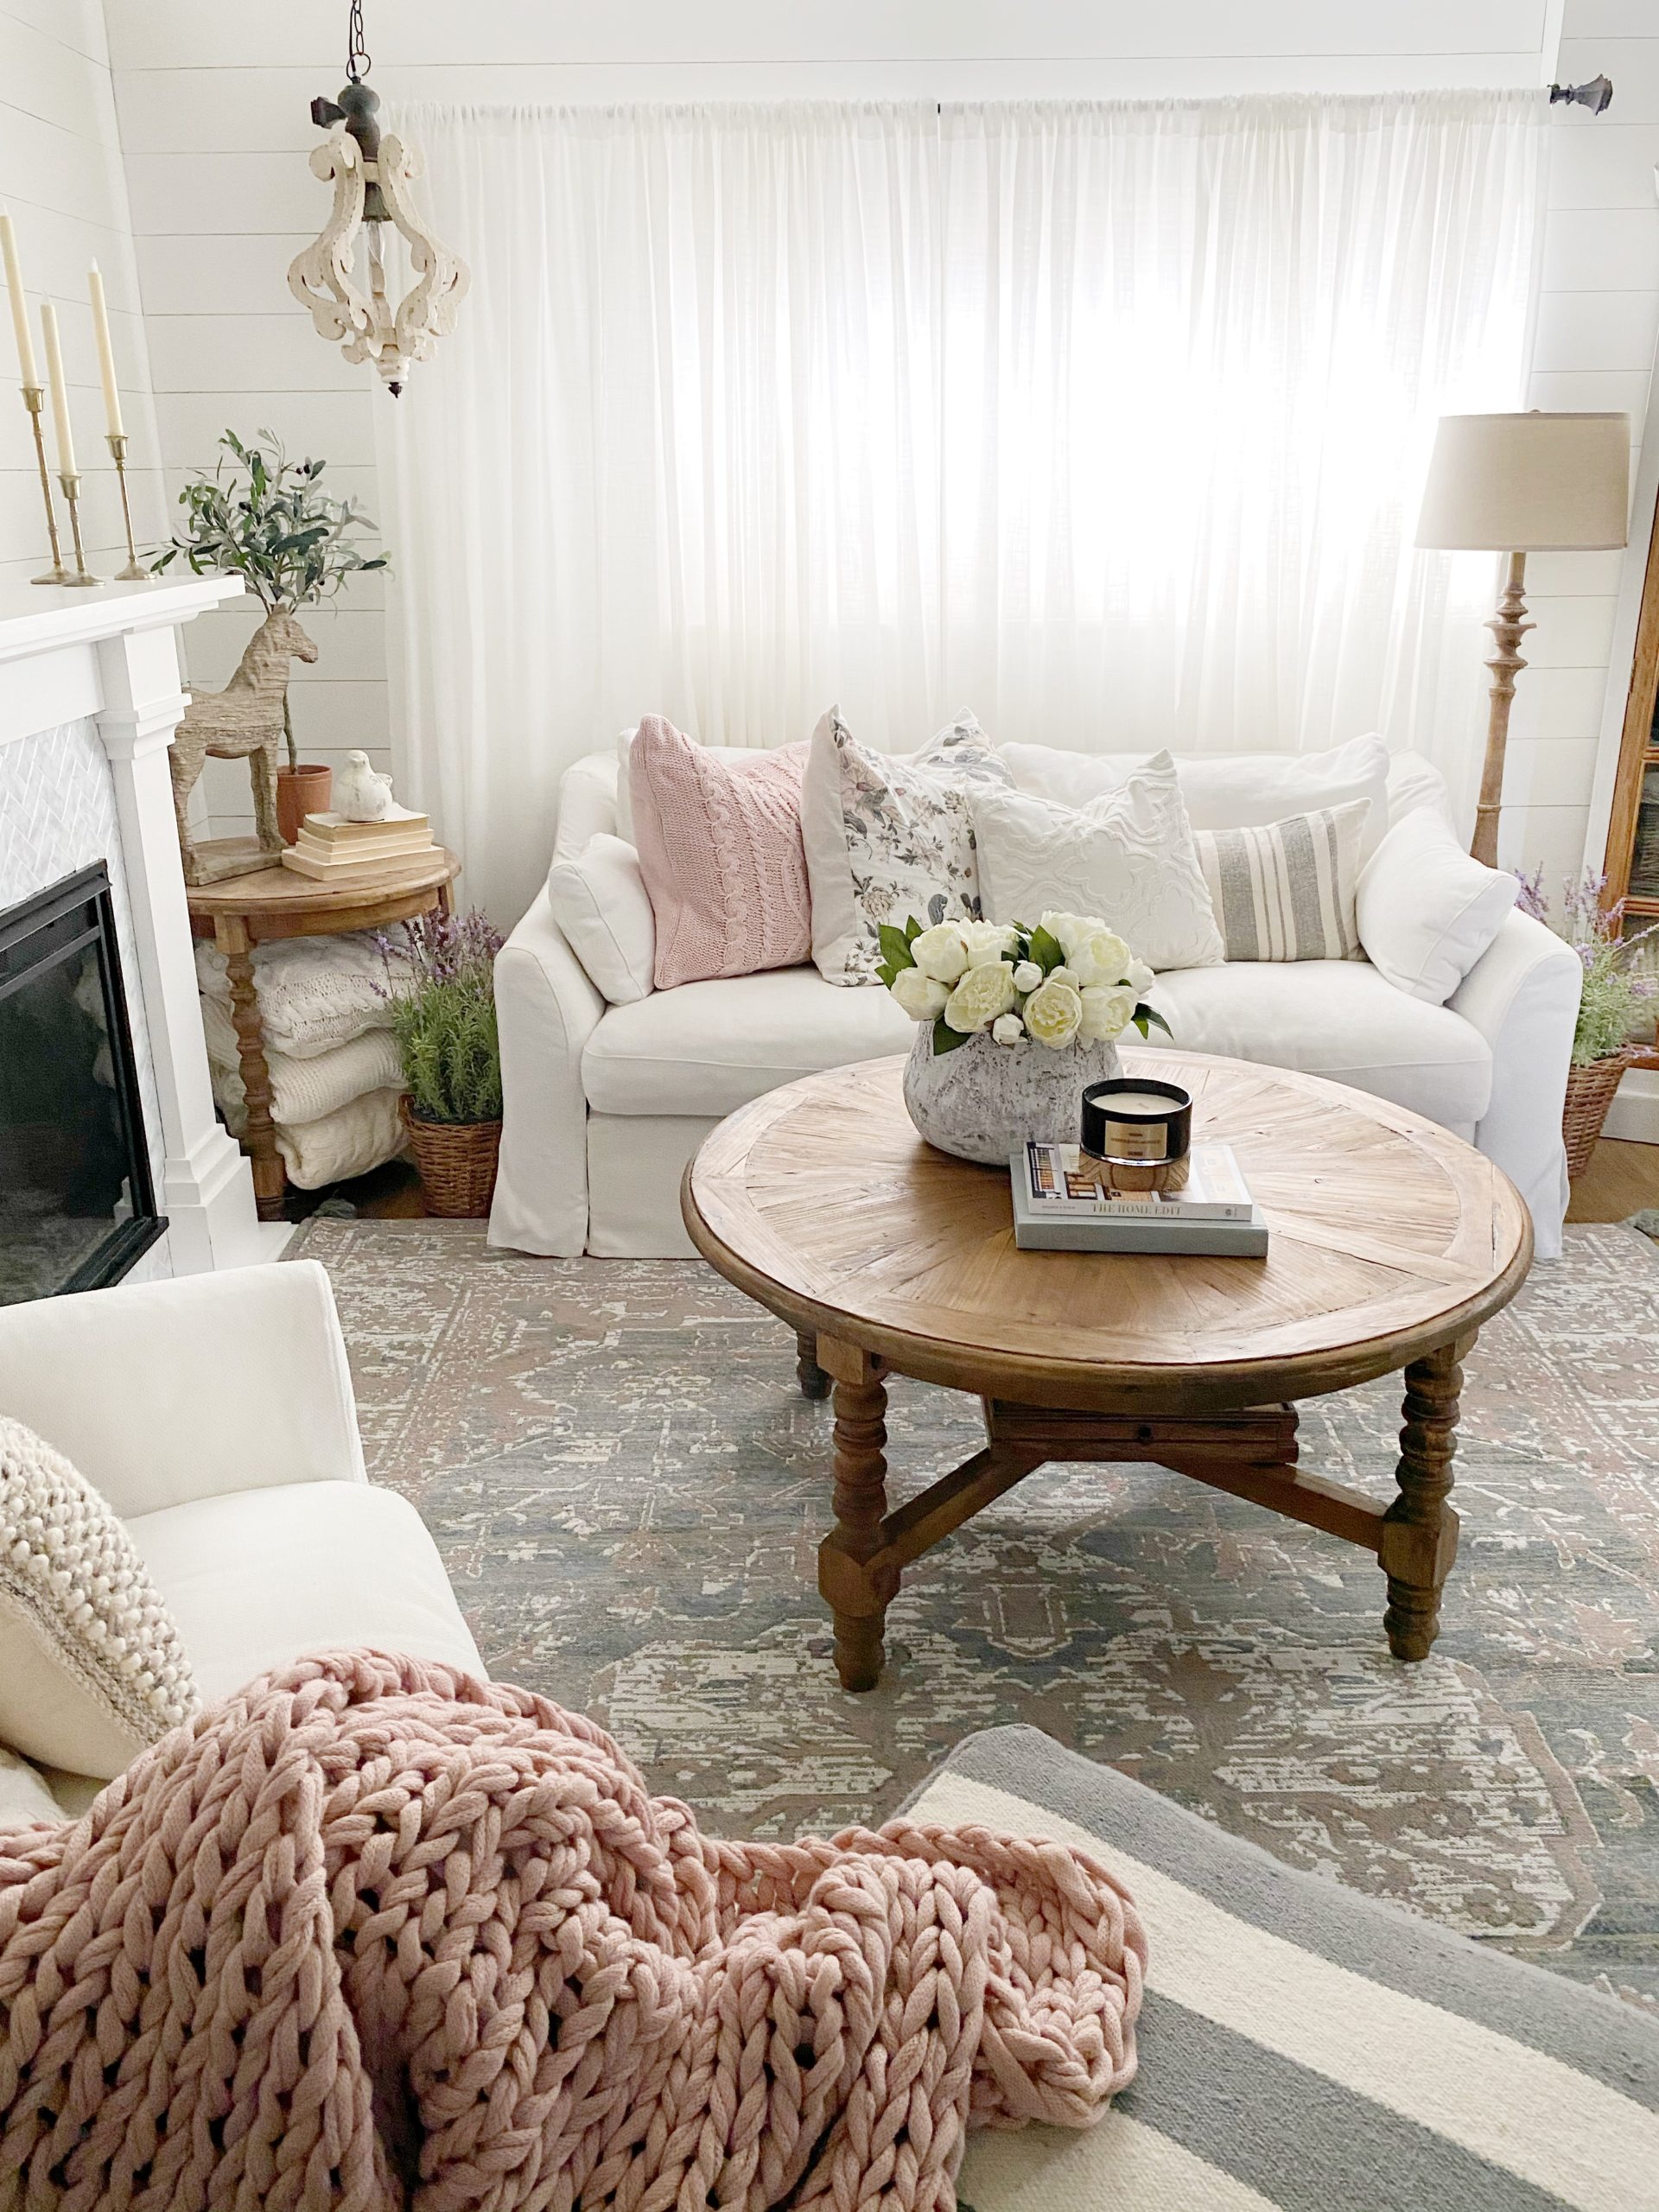 3 Easy Ways to Update Your Living Room